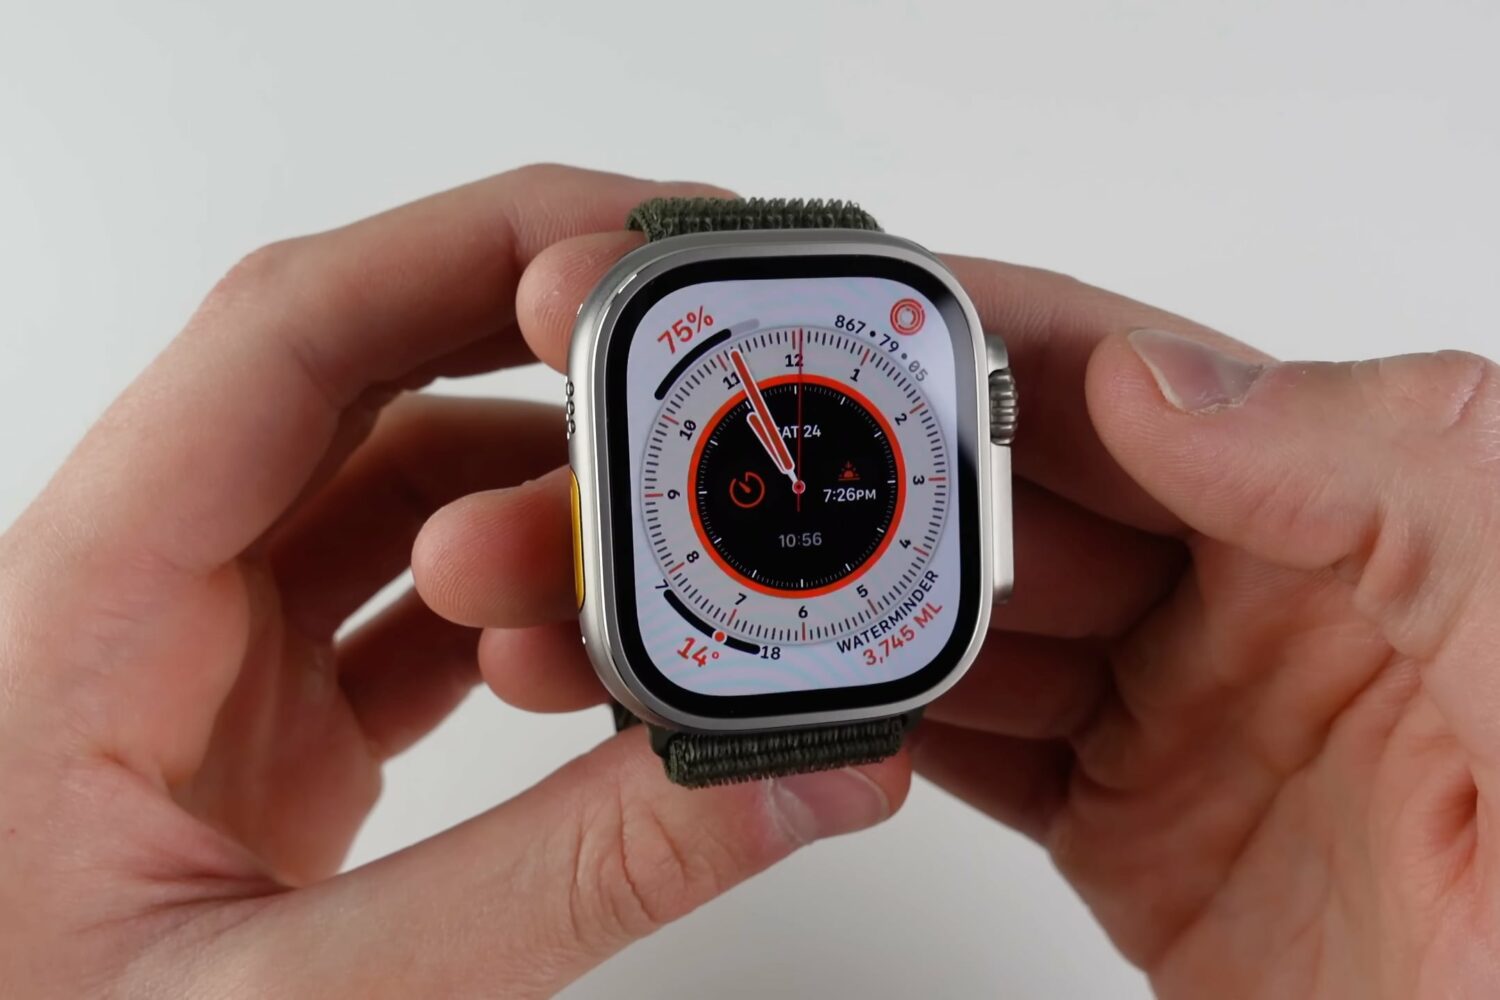 Apple Watch Ultra held in hands, displaying the Wayfinder watch face